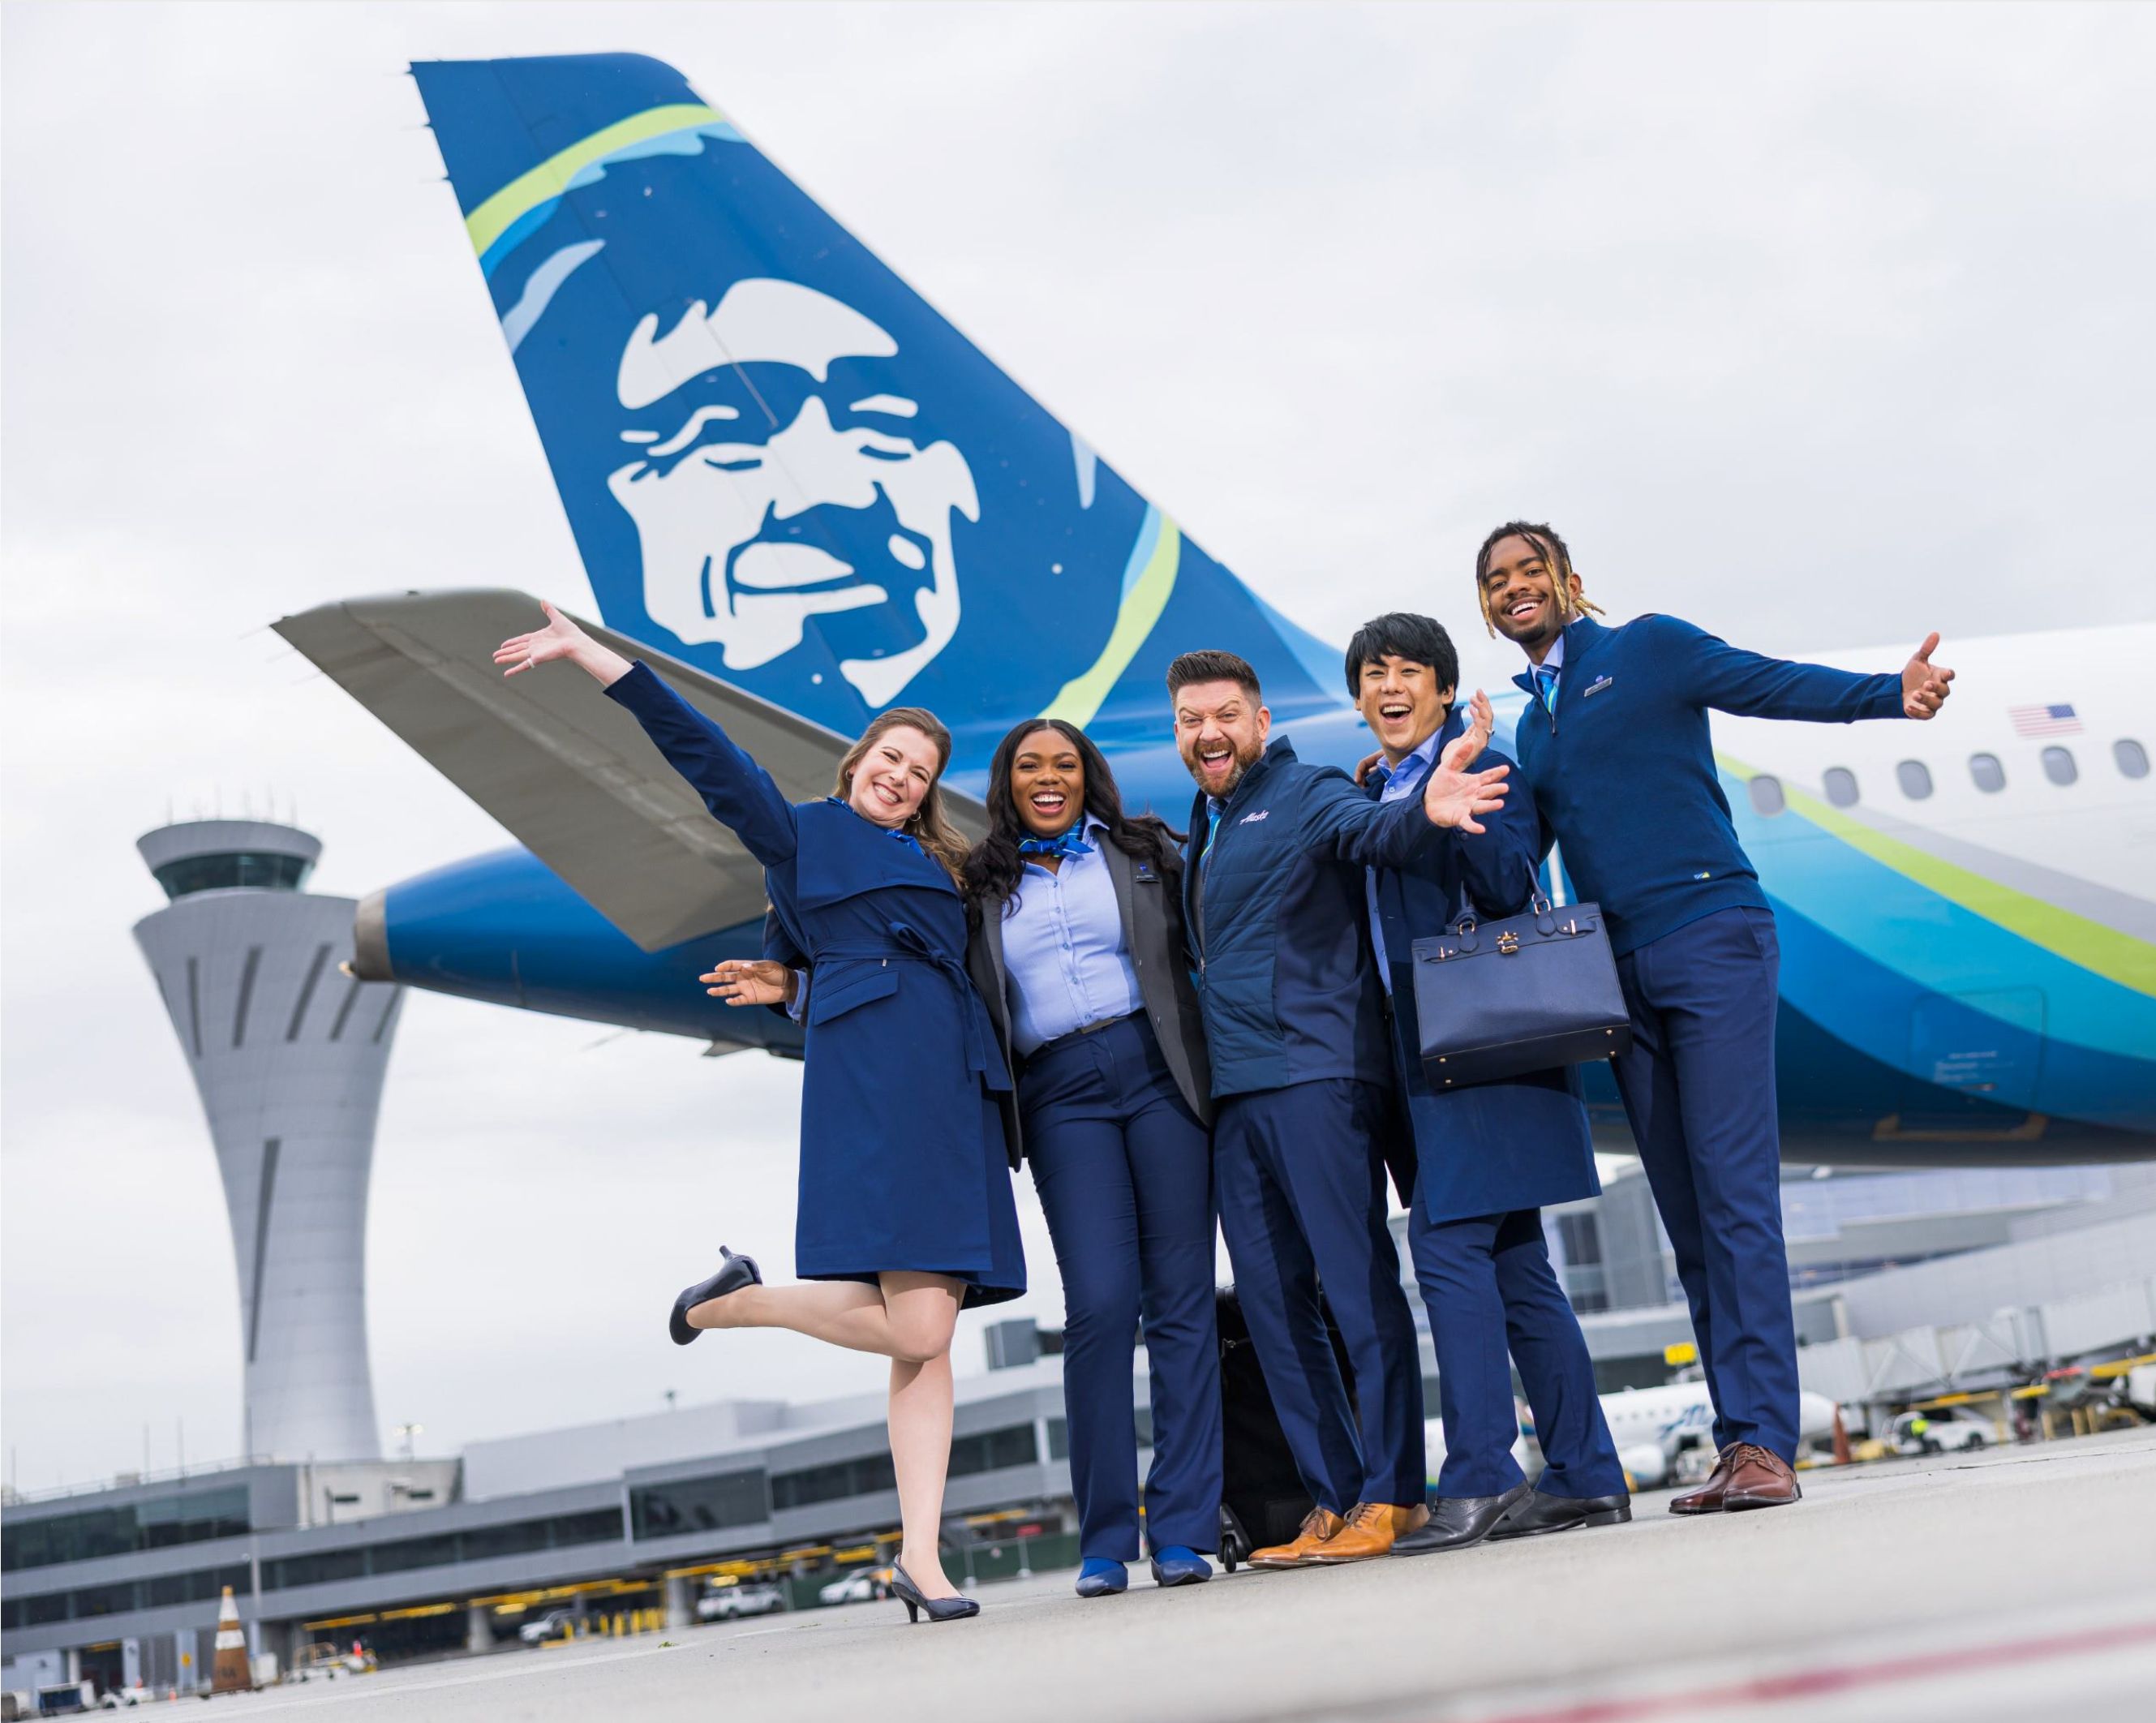 Alaska Airlines Employees of Multiple Genders Posing With A321 & Control Tower